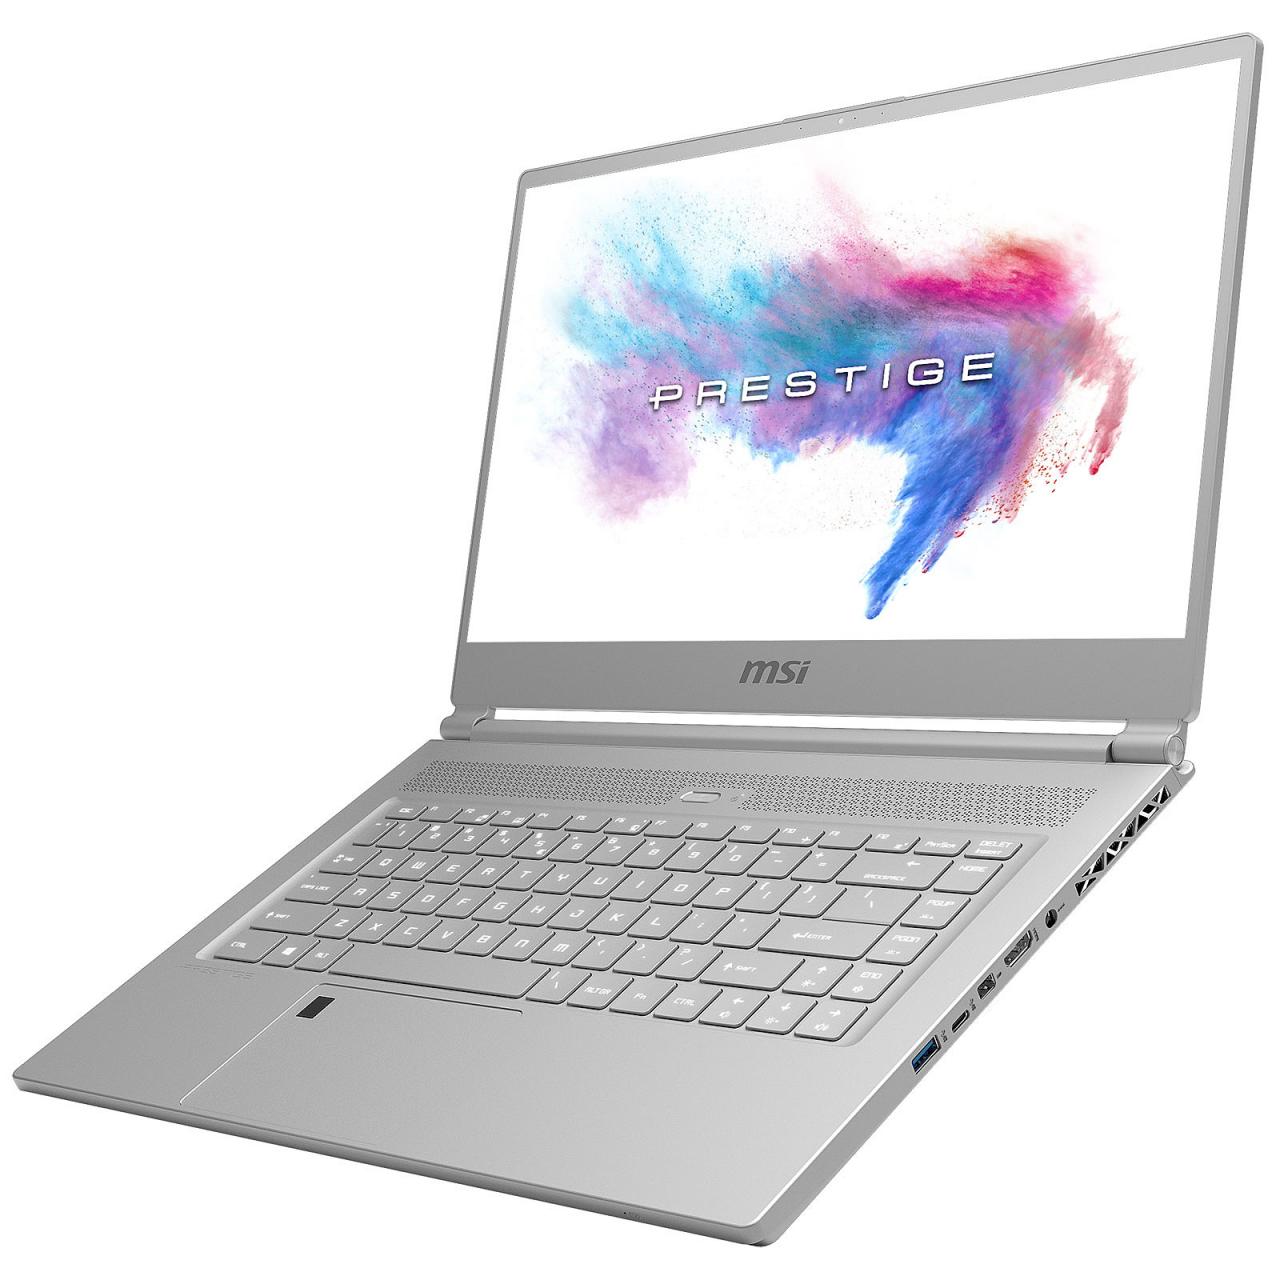 MSI P65 9SF-891 Specs and Details